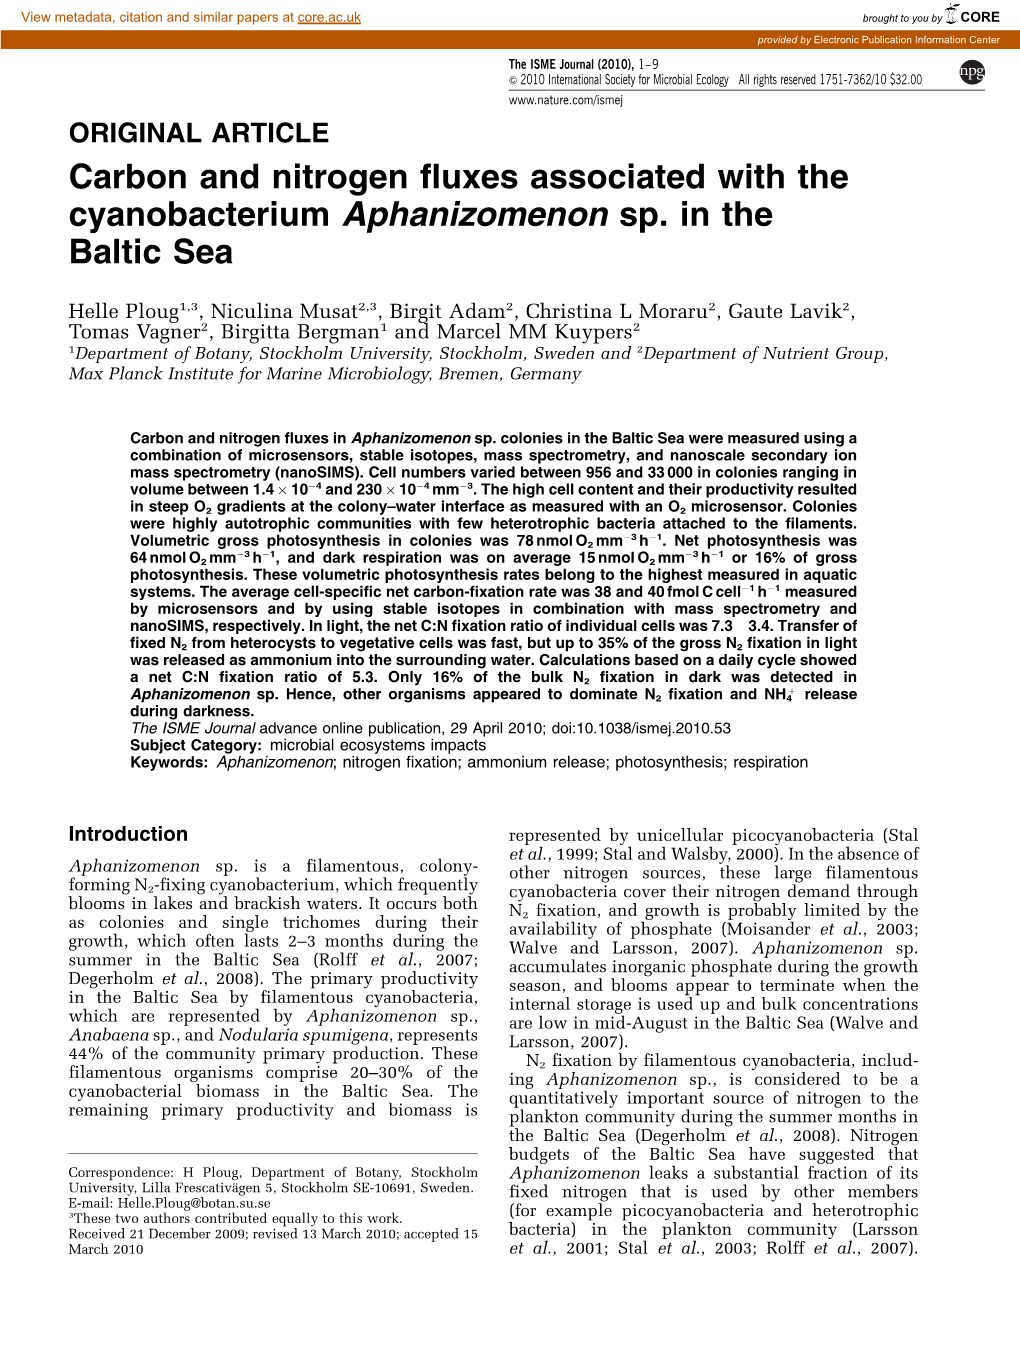 Carbon and Nitrogen Fluxes Associated with the Cyanobacterium Aphanizomenon Sp